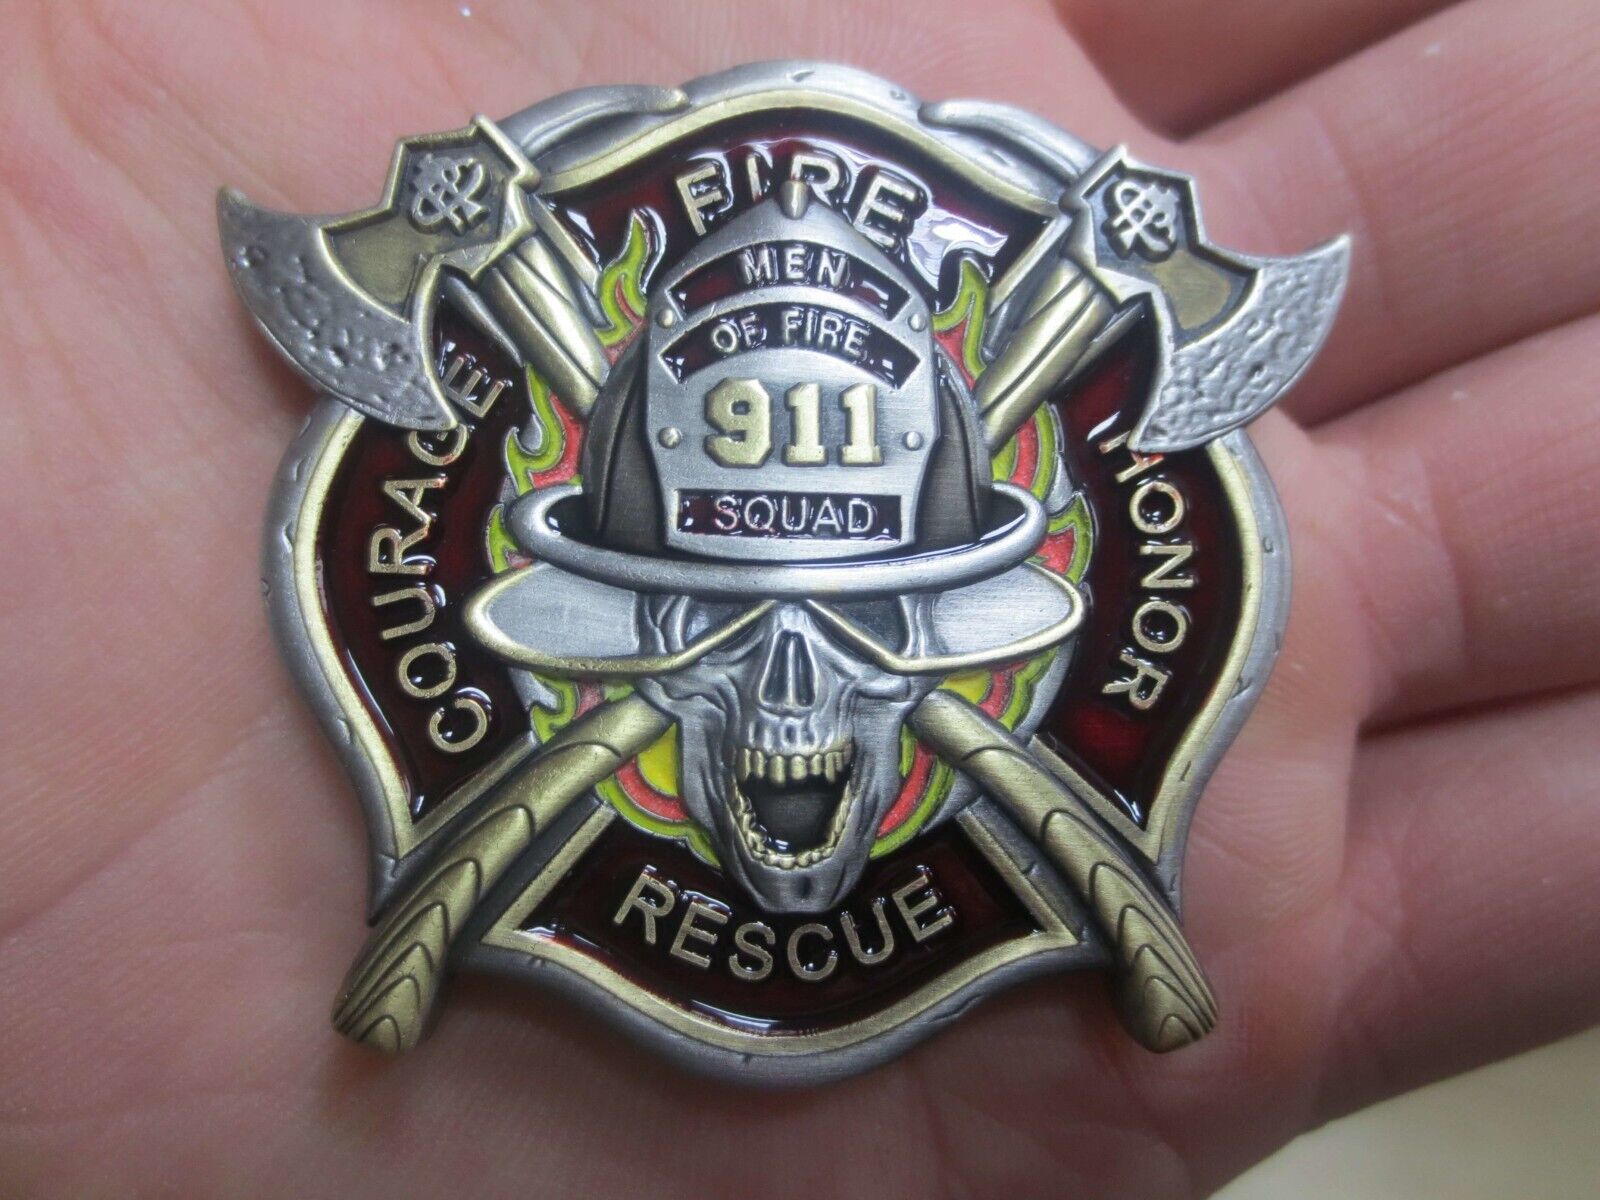 Men Of Fire 911 Squad Firefighter Challenge Coin